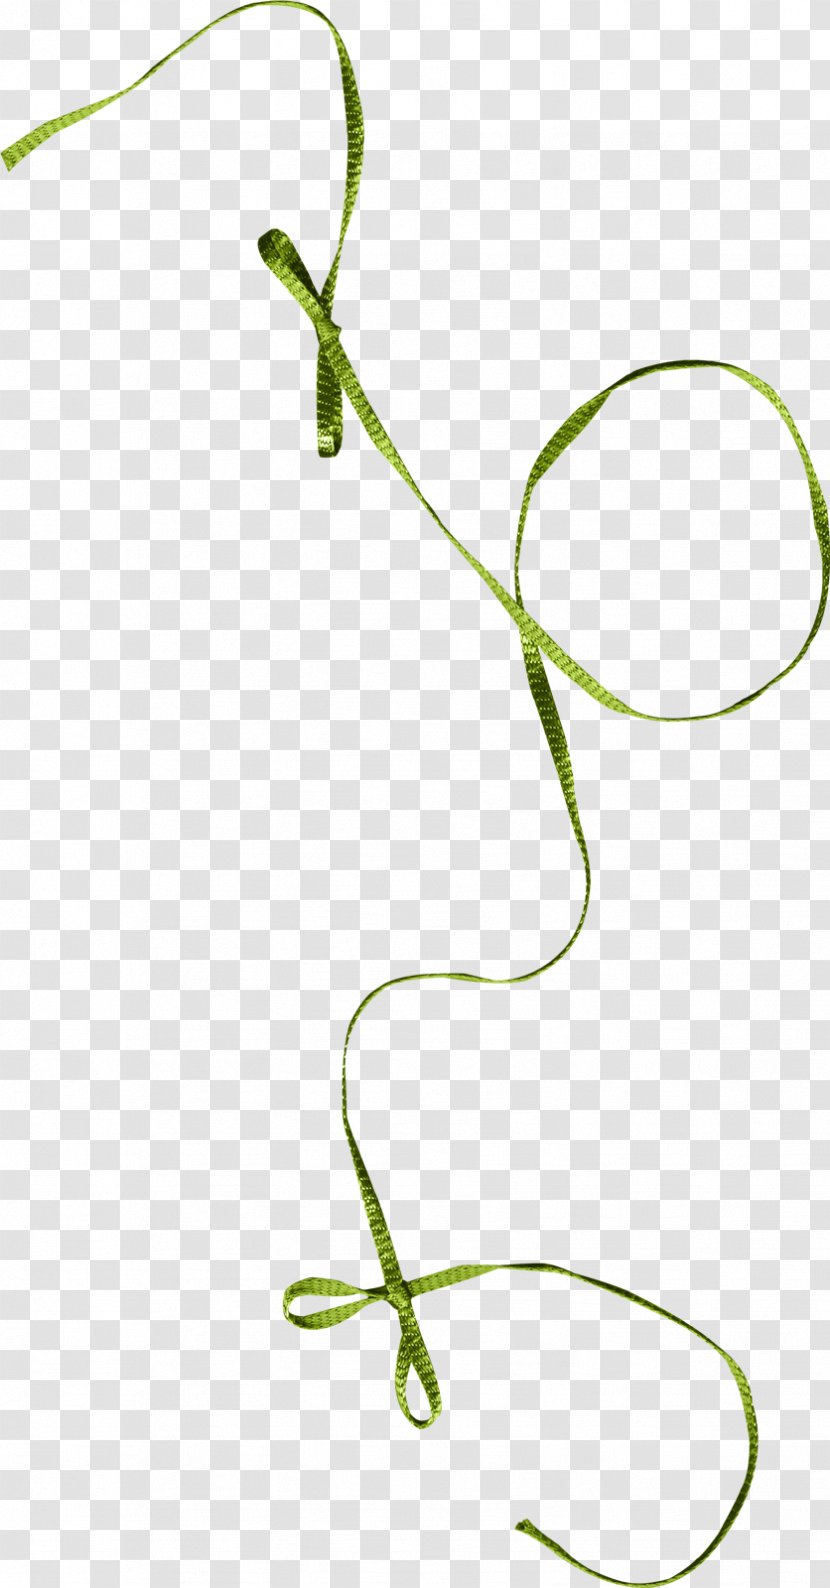 Ribbon Green Shoelace Knot Image - Tree - Empty Transparent PNG